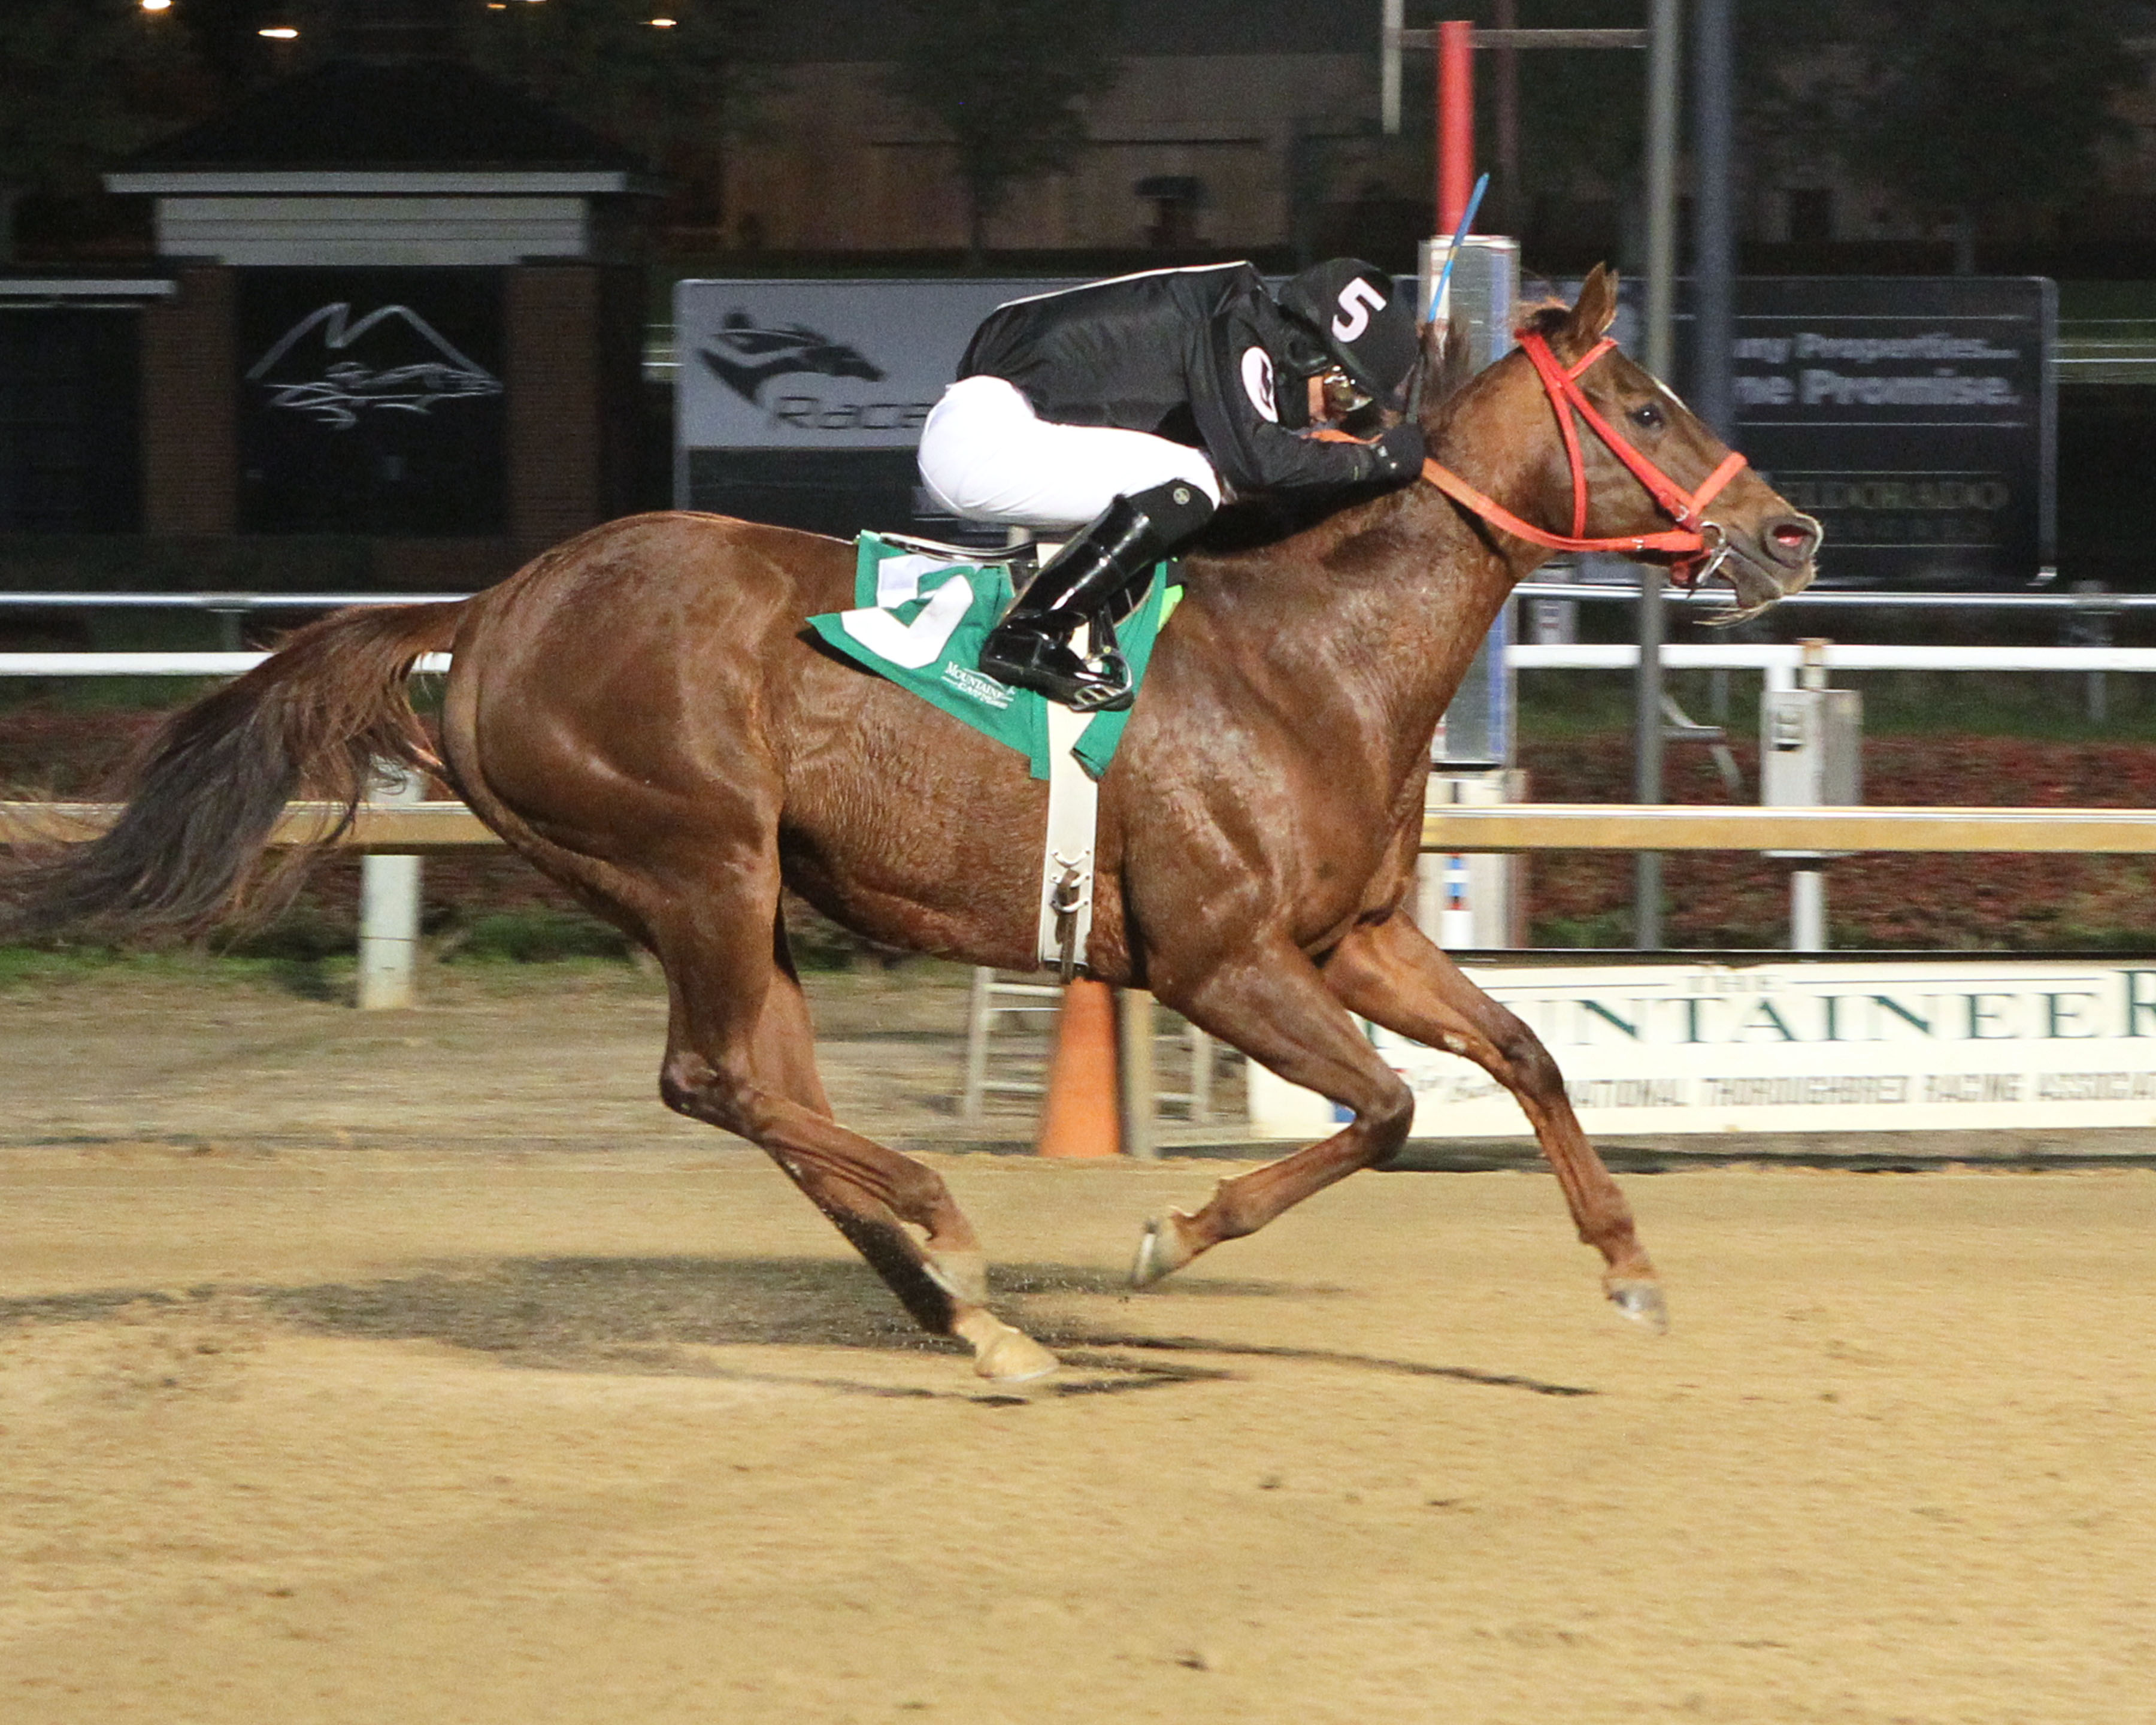 Fur Lined's win at Mountaineer November 13th got owner Amailia Cox a 25% bonus courtesy of the VTA/HBPA Mid-Atlantic incentive program. Photo by Coady Photography.